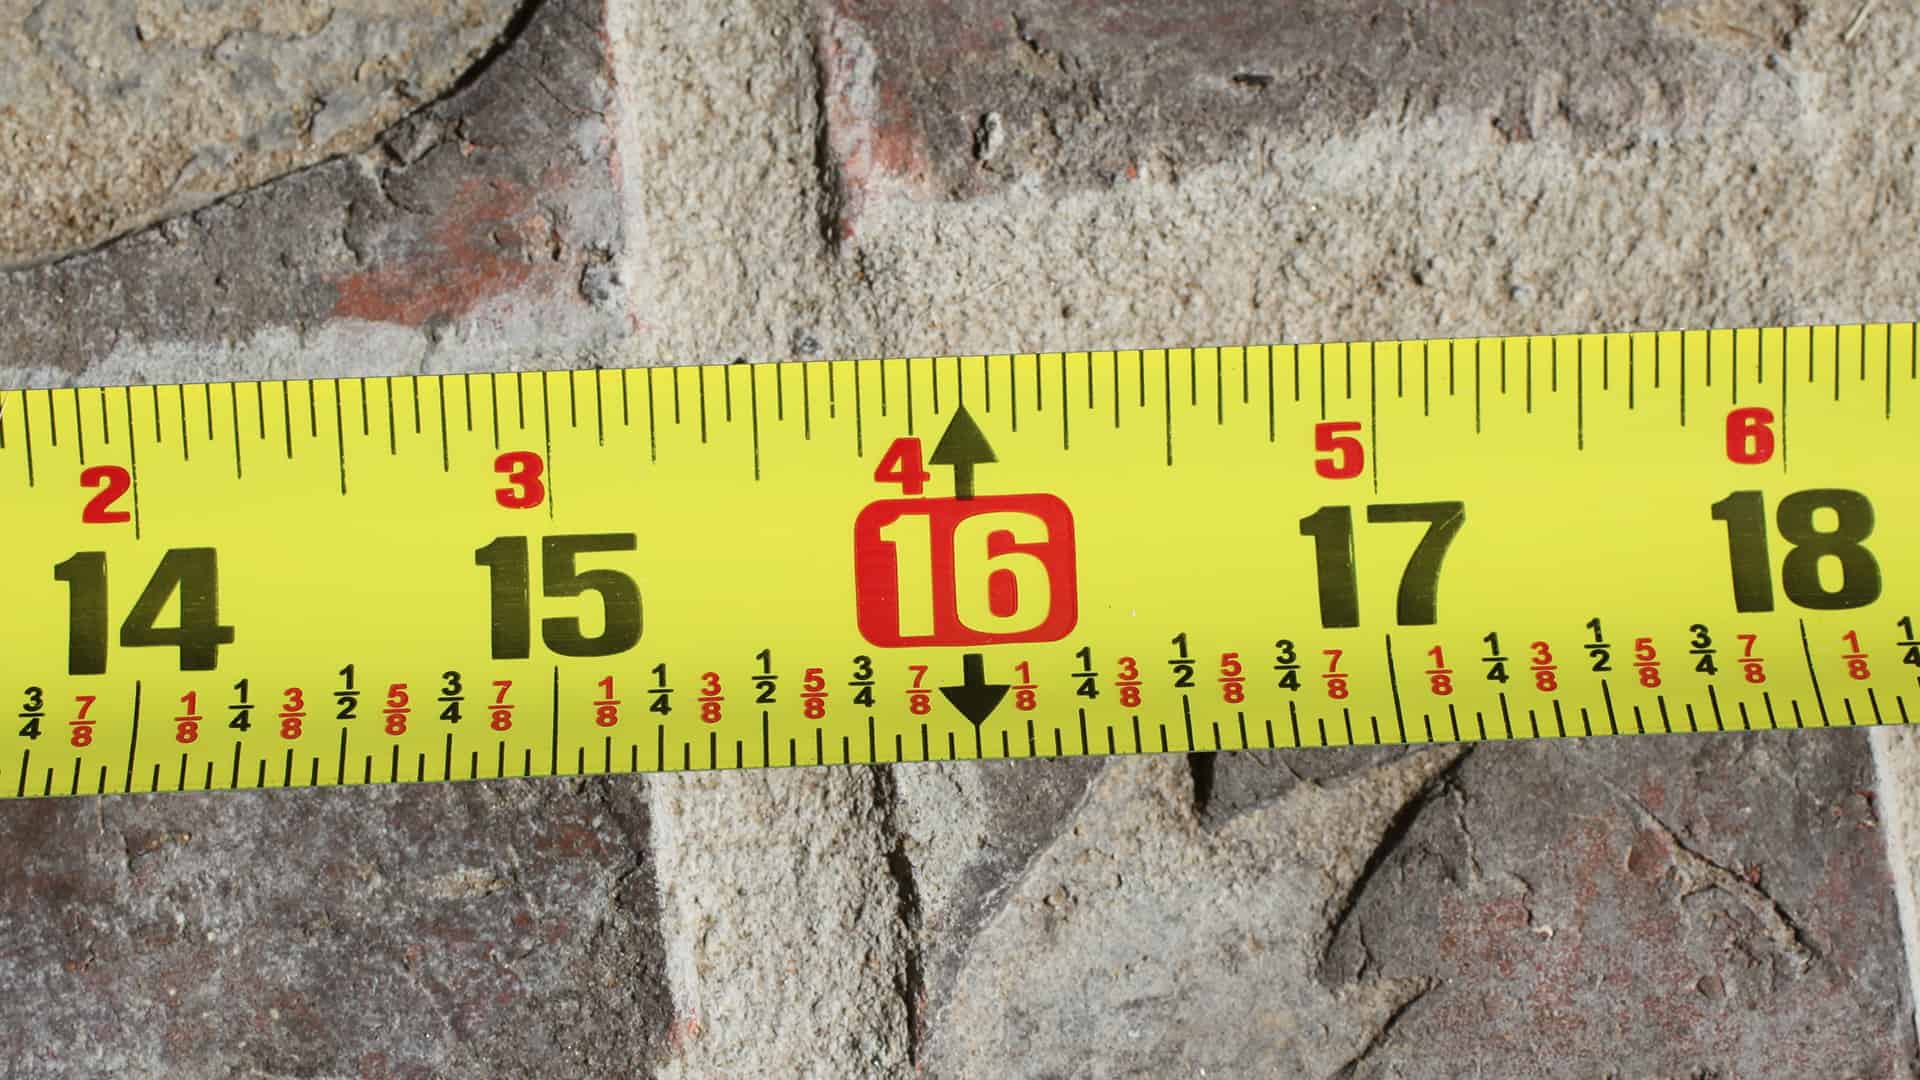 https://www.thegeekpub.com/wp-content/uploads/2015/10/How-to-use-a-tape-measure-the-right-way-0007.jpg